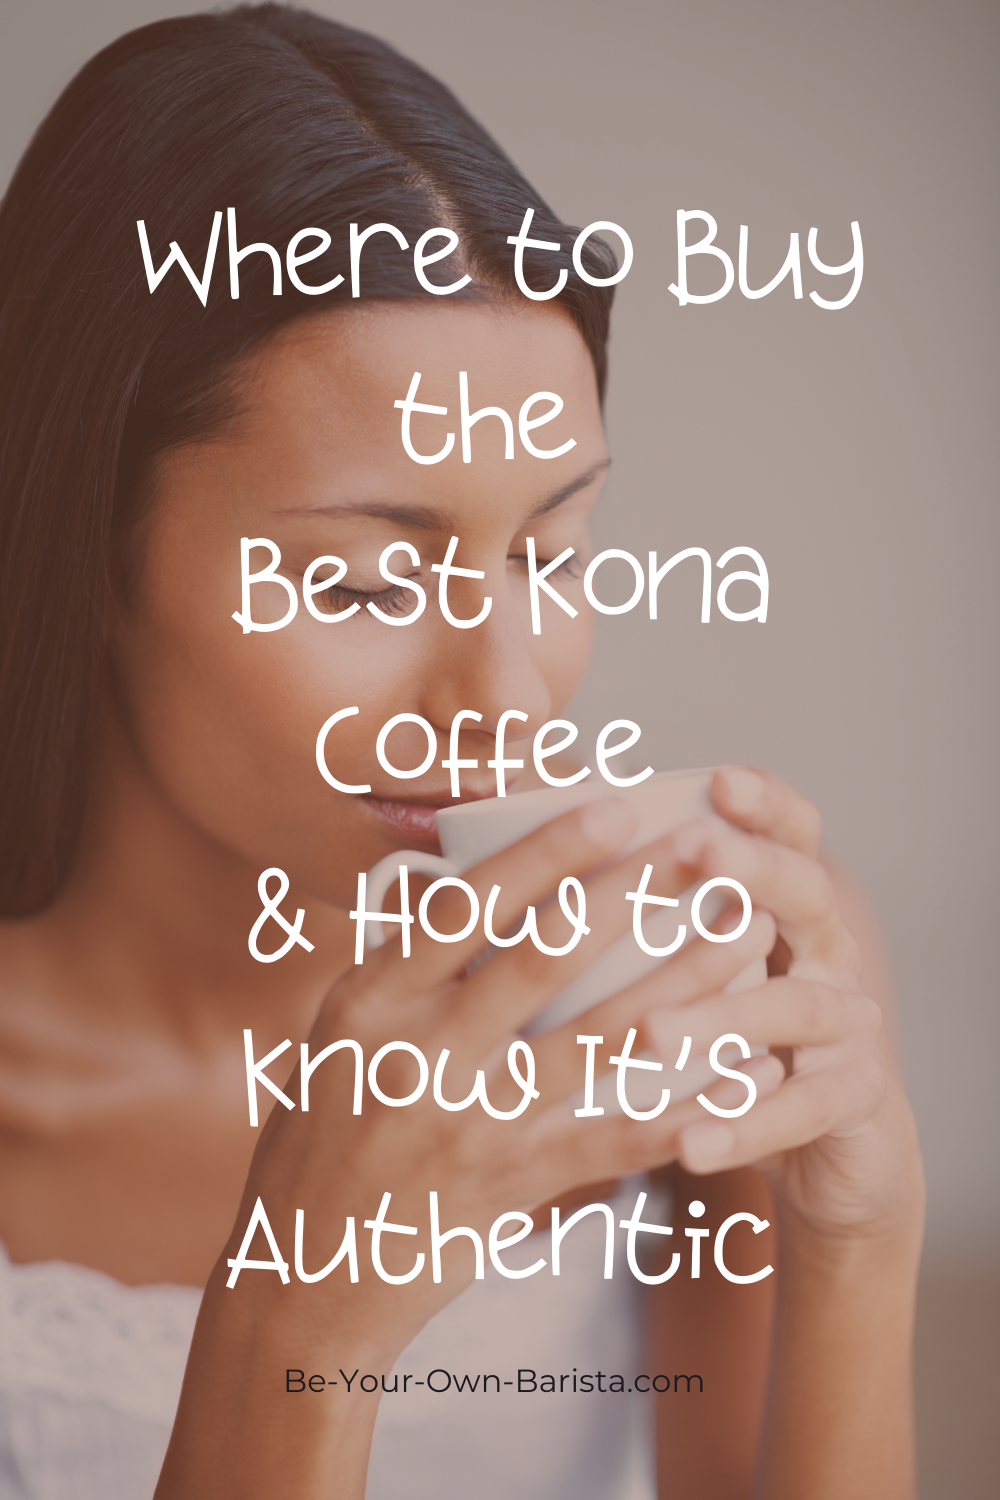 Where to Buy the Best Kona Coffee & How to Know It’s Authentic